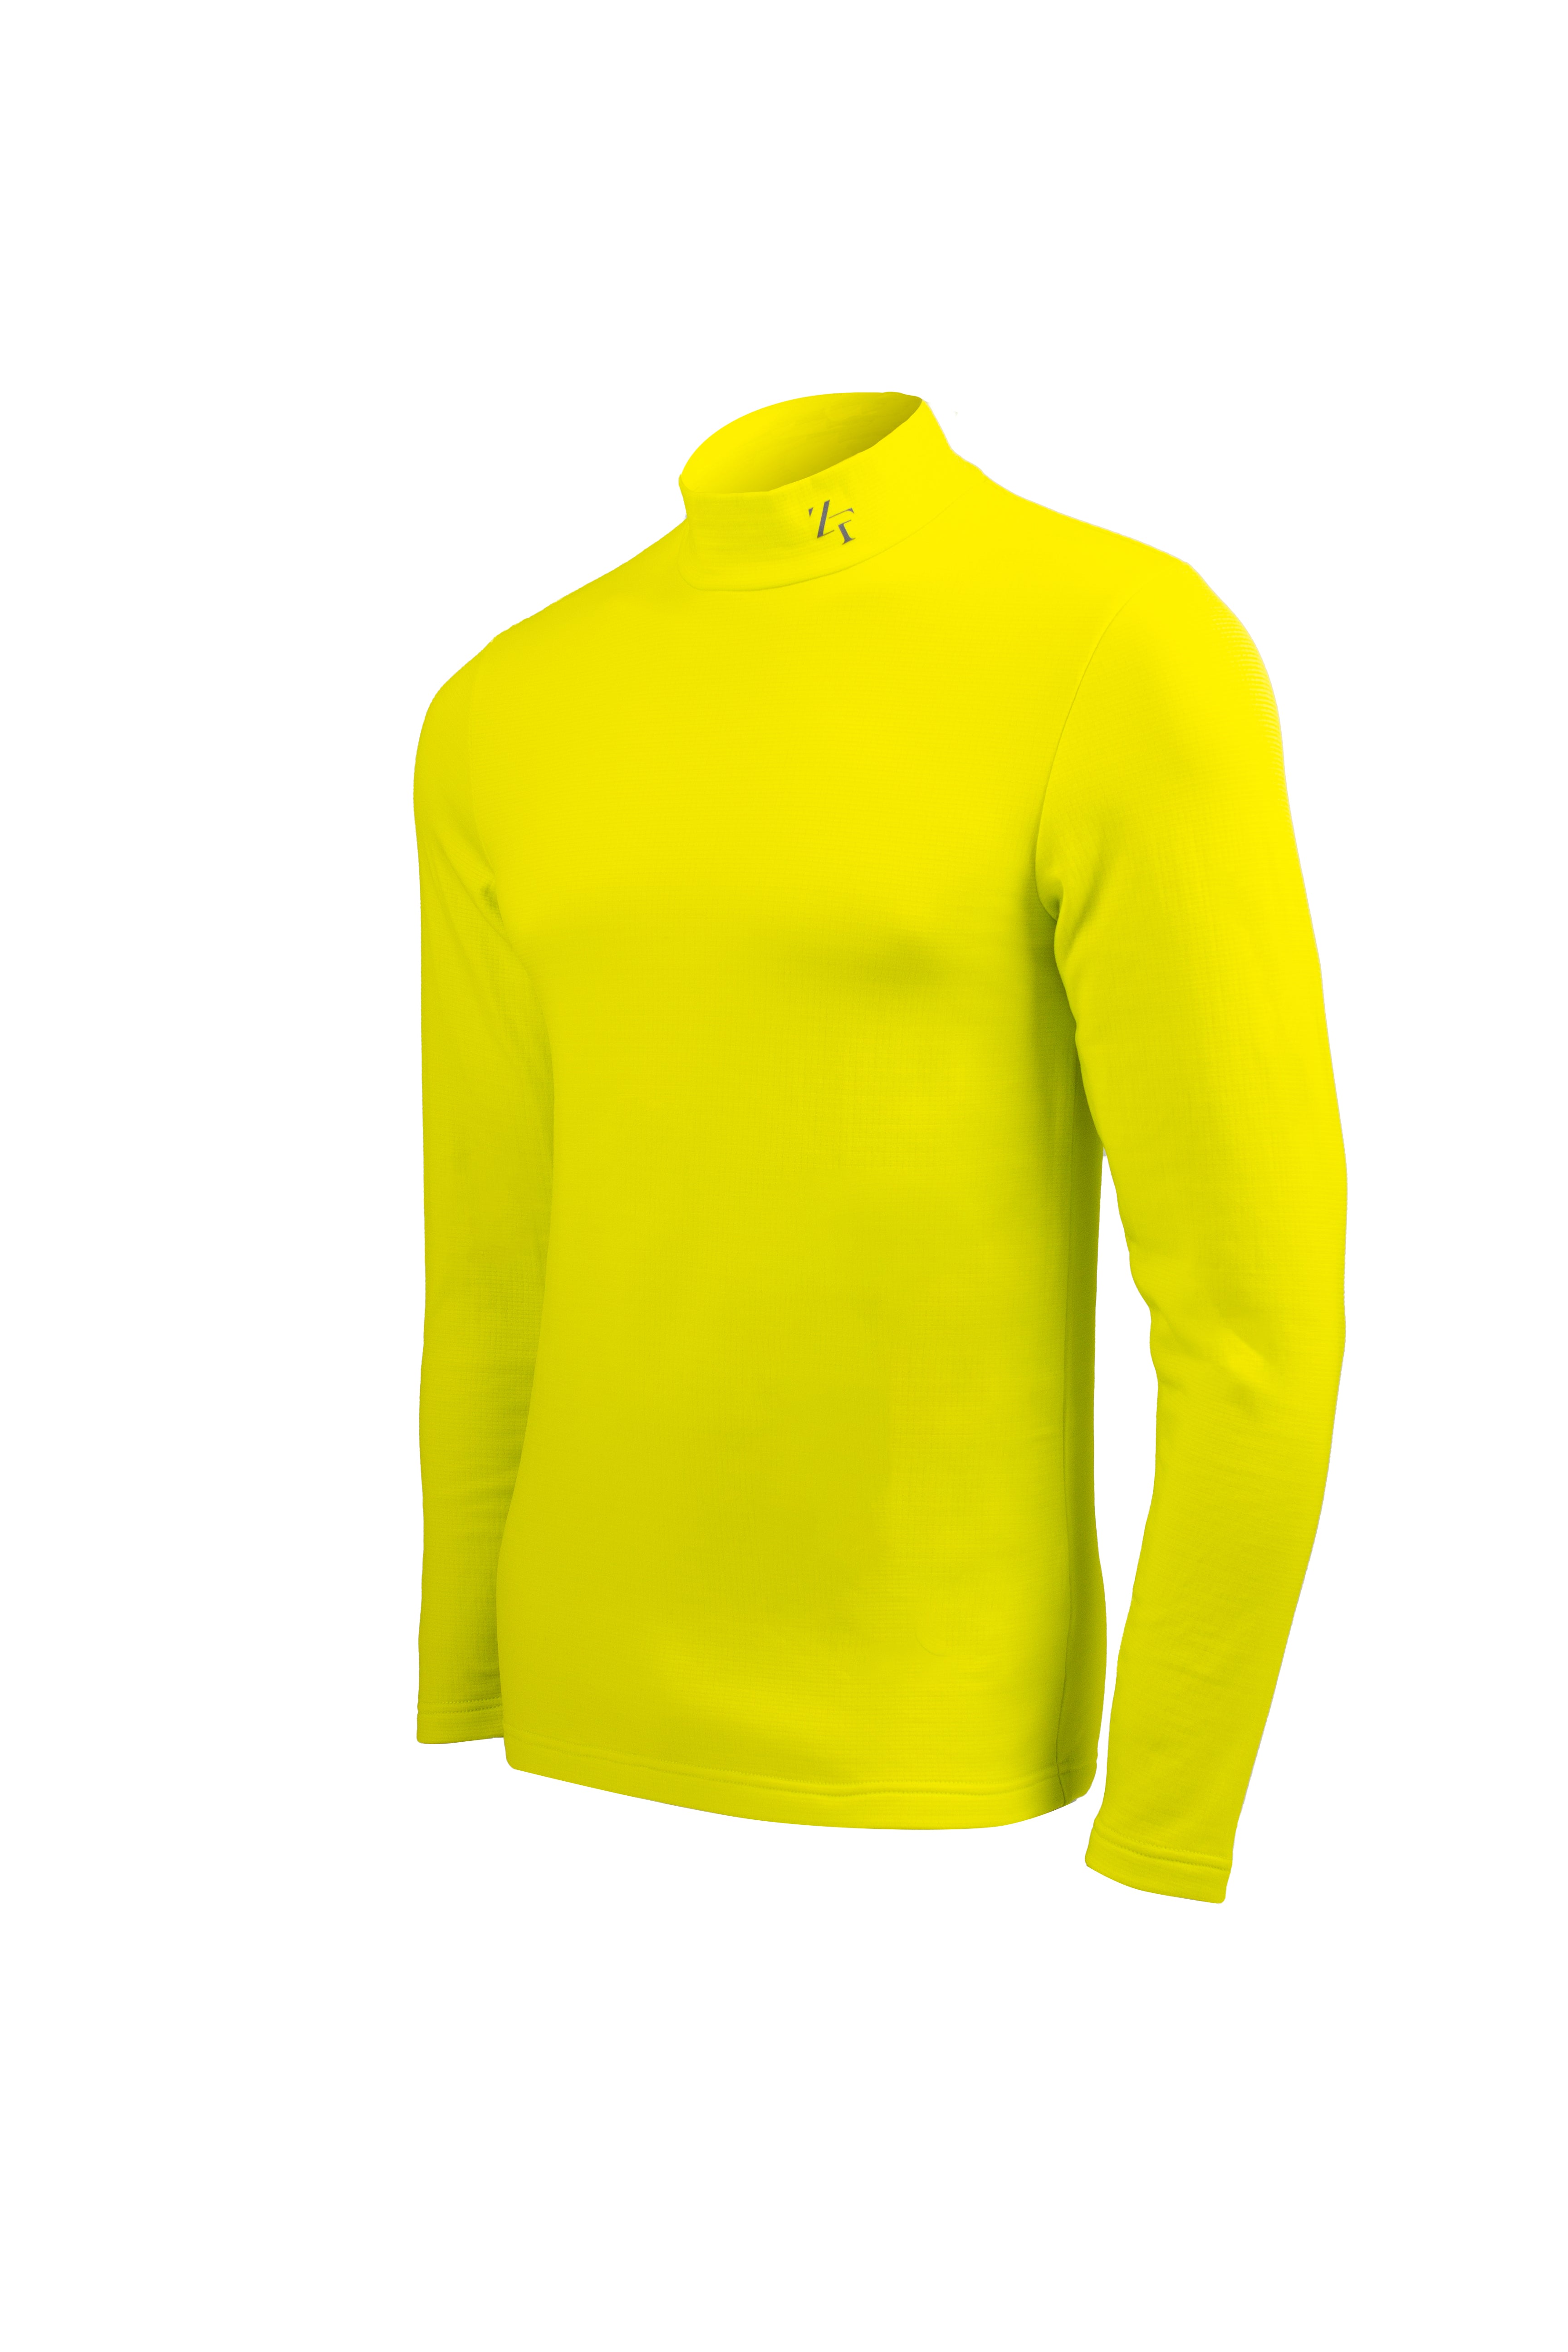 Under Armour Coldgear Base Layer Long Sleeve Crew Neck Yellow Women's Size  M